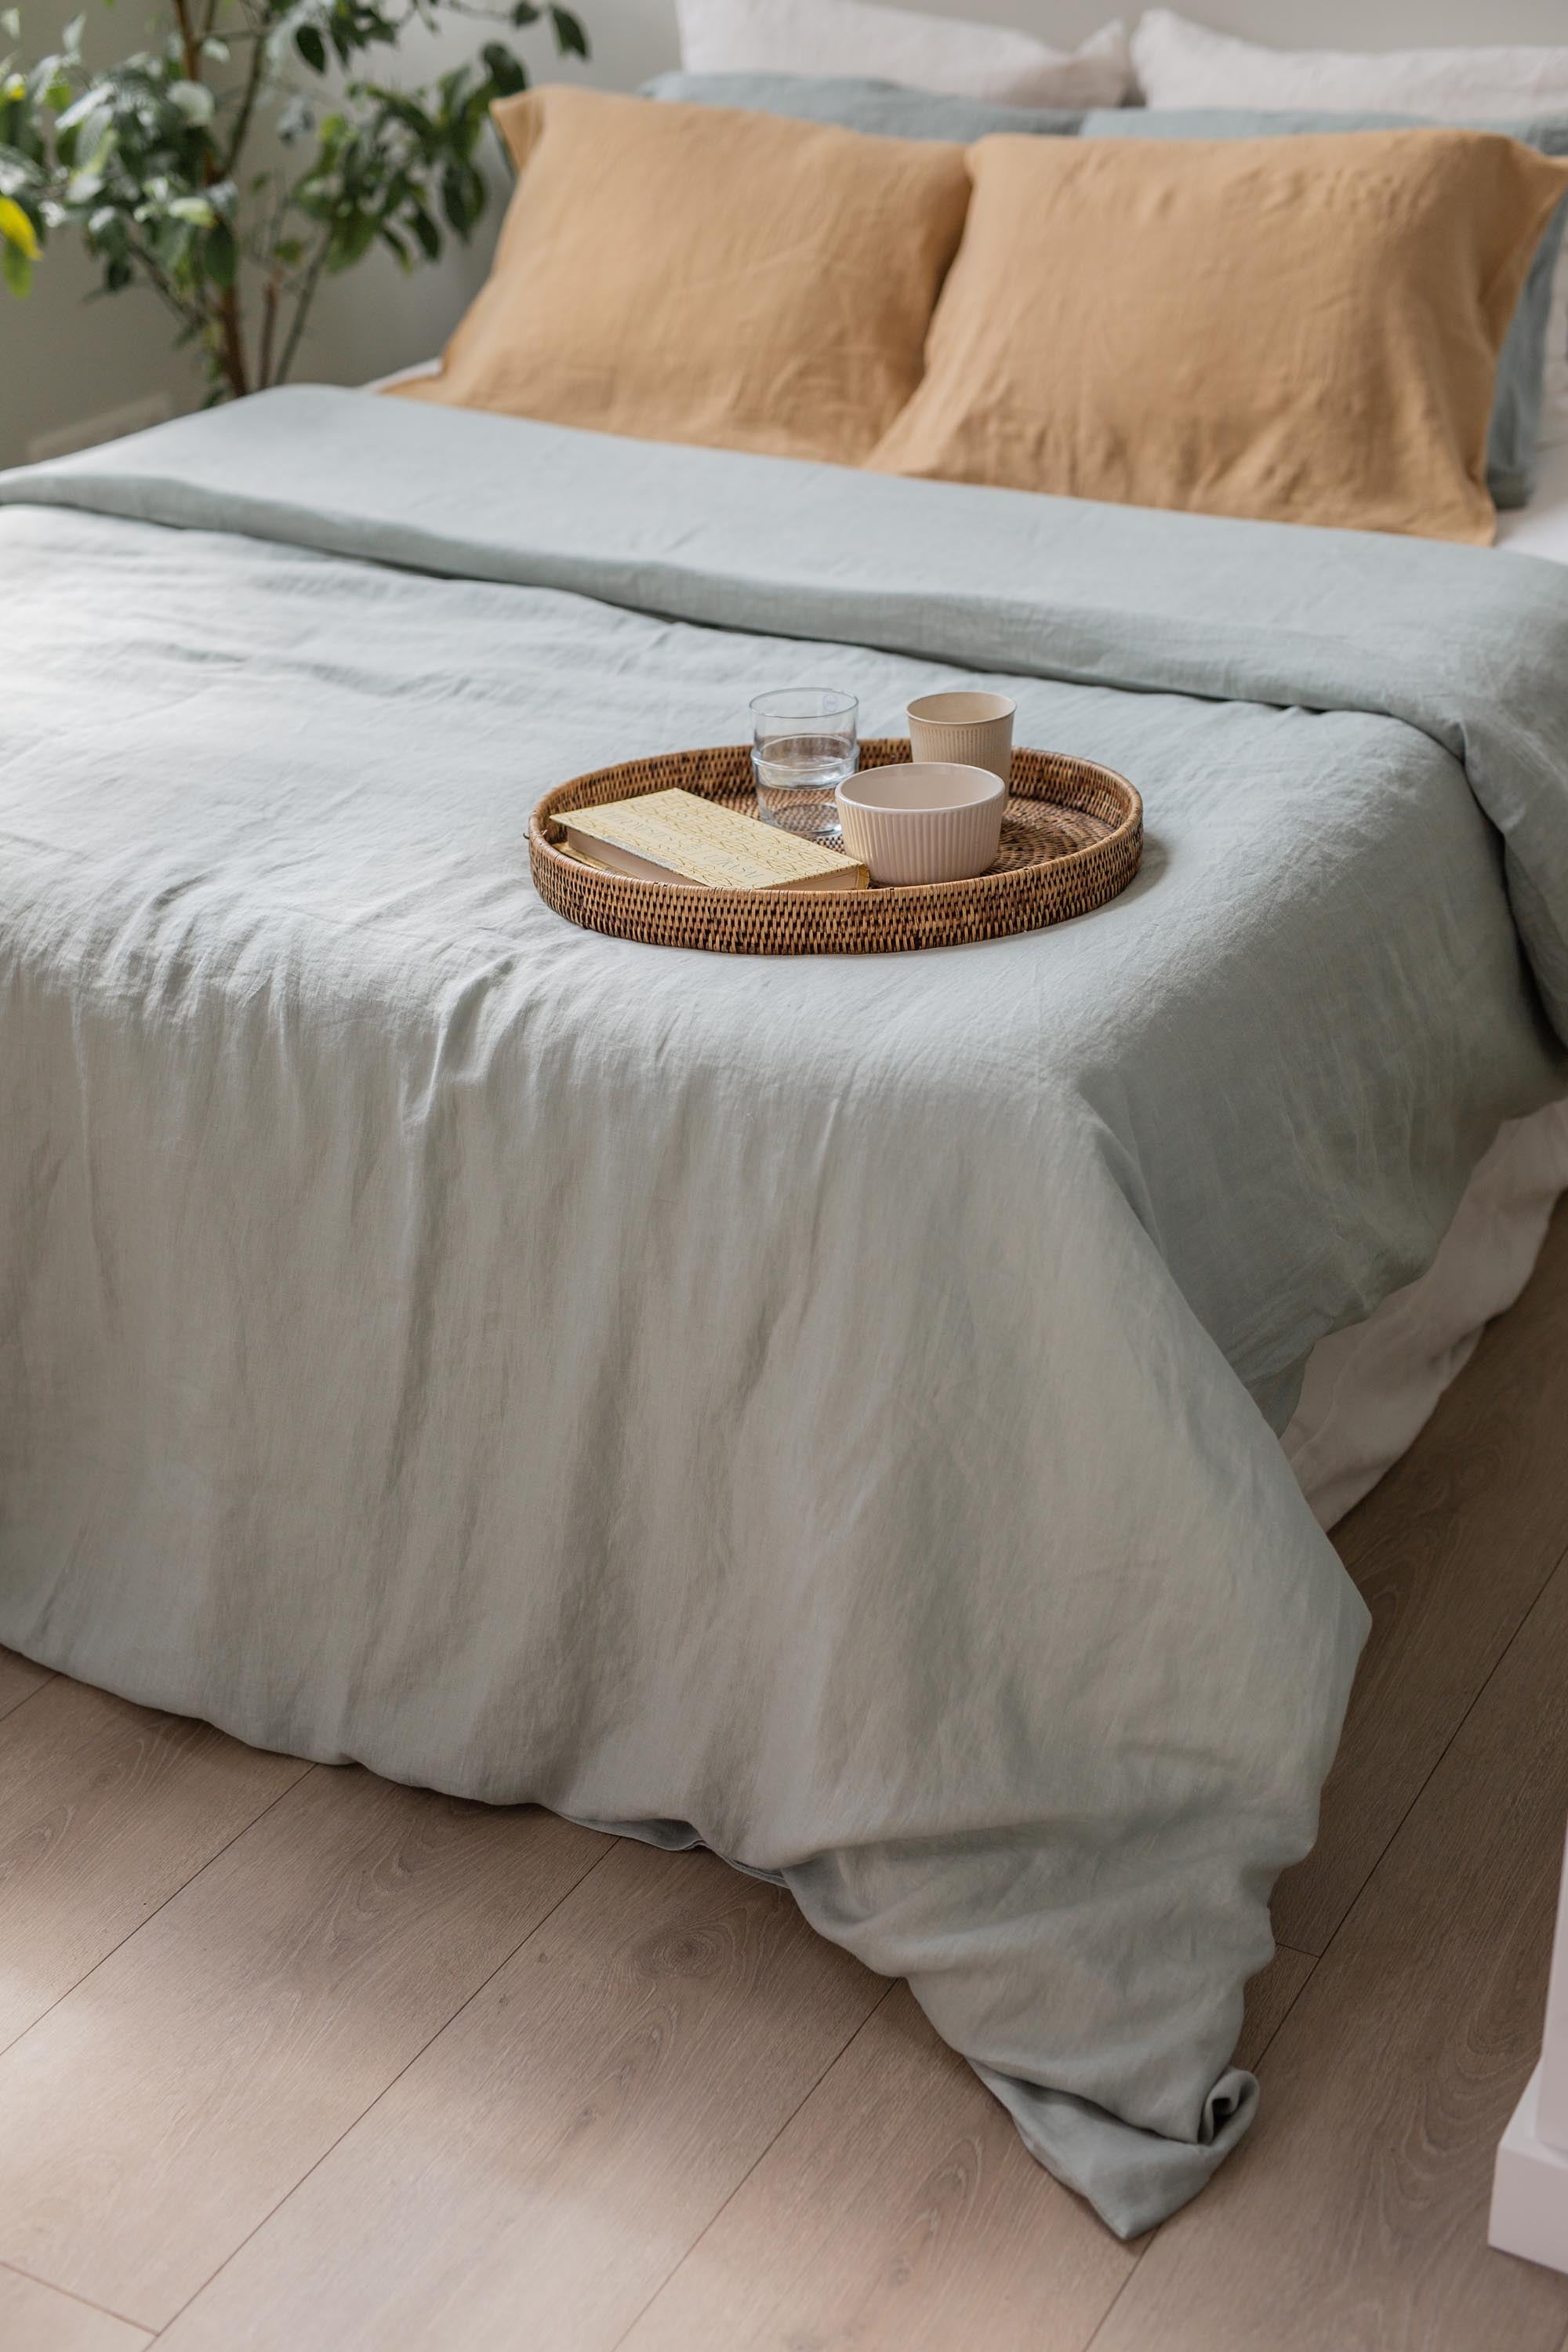 Breakfast in Bed With Sage Green Linen Duvet Cover By AmourlInen